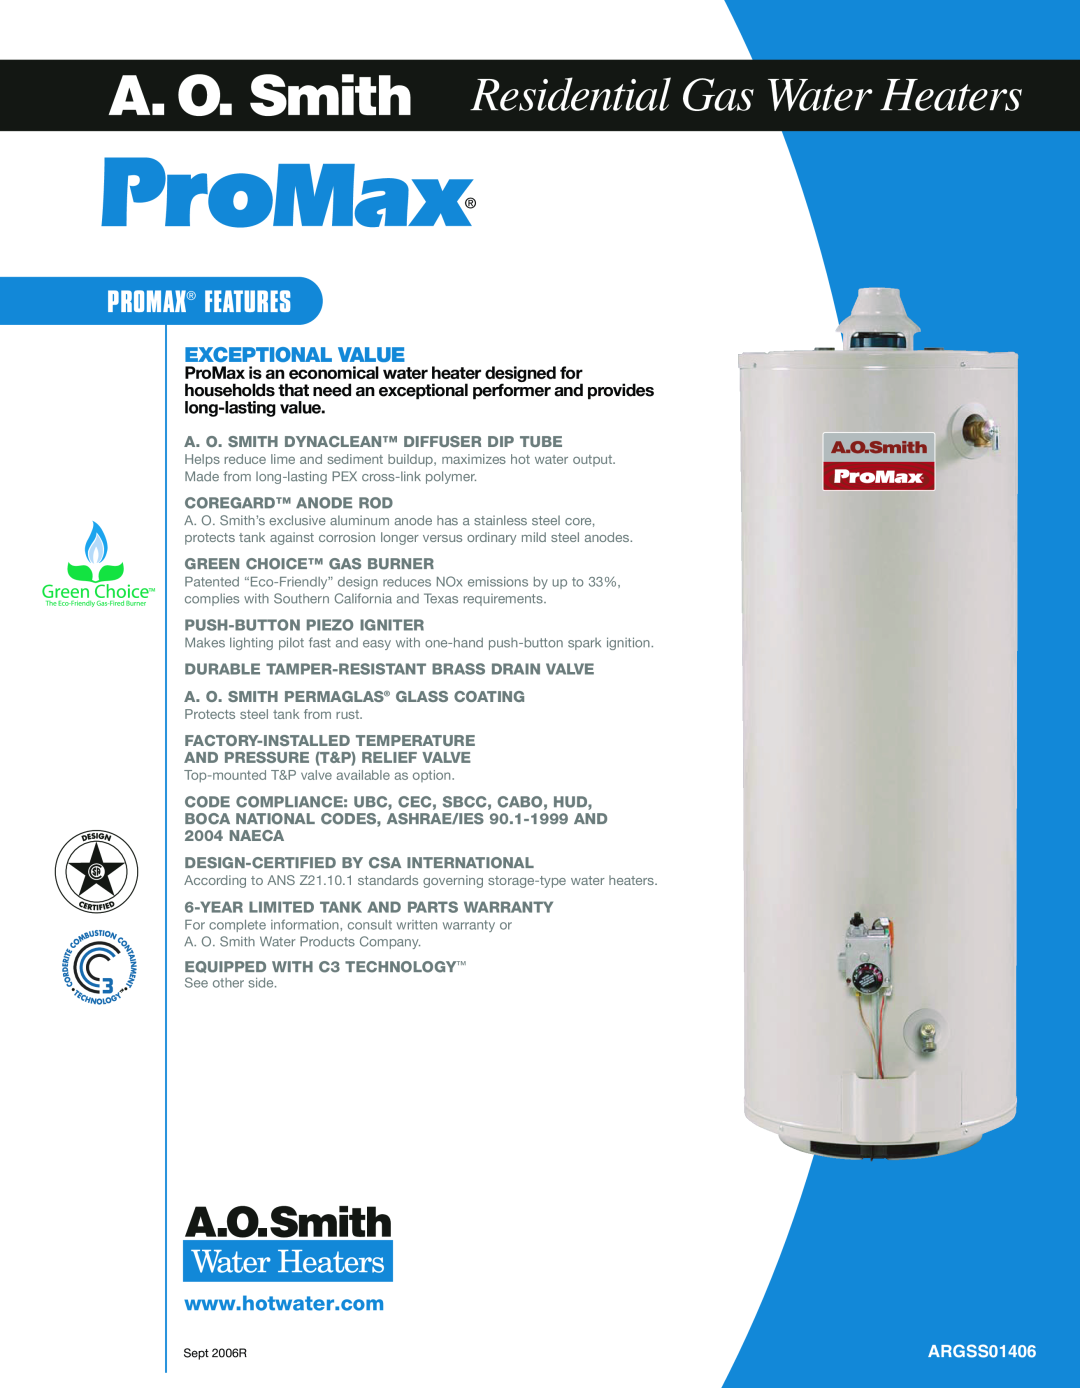 A.O. Smith GVC-50, XCV-30 warranty Residential Gas Water Heaters, ARGSS01406, Promax Features, Exceptional Value 